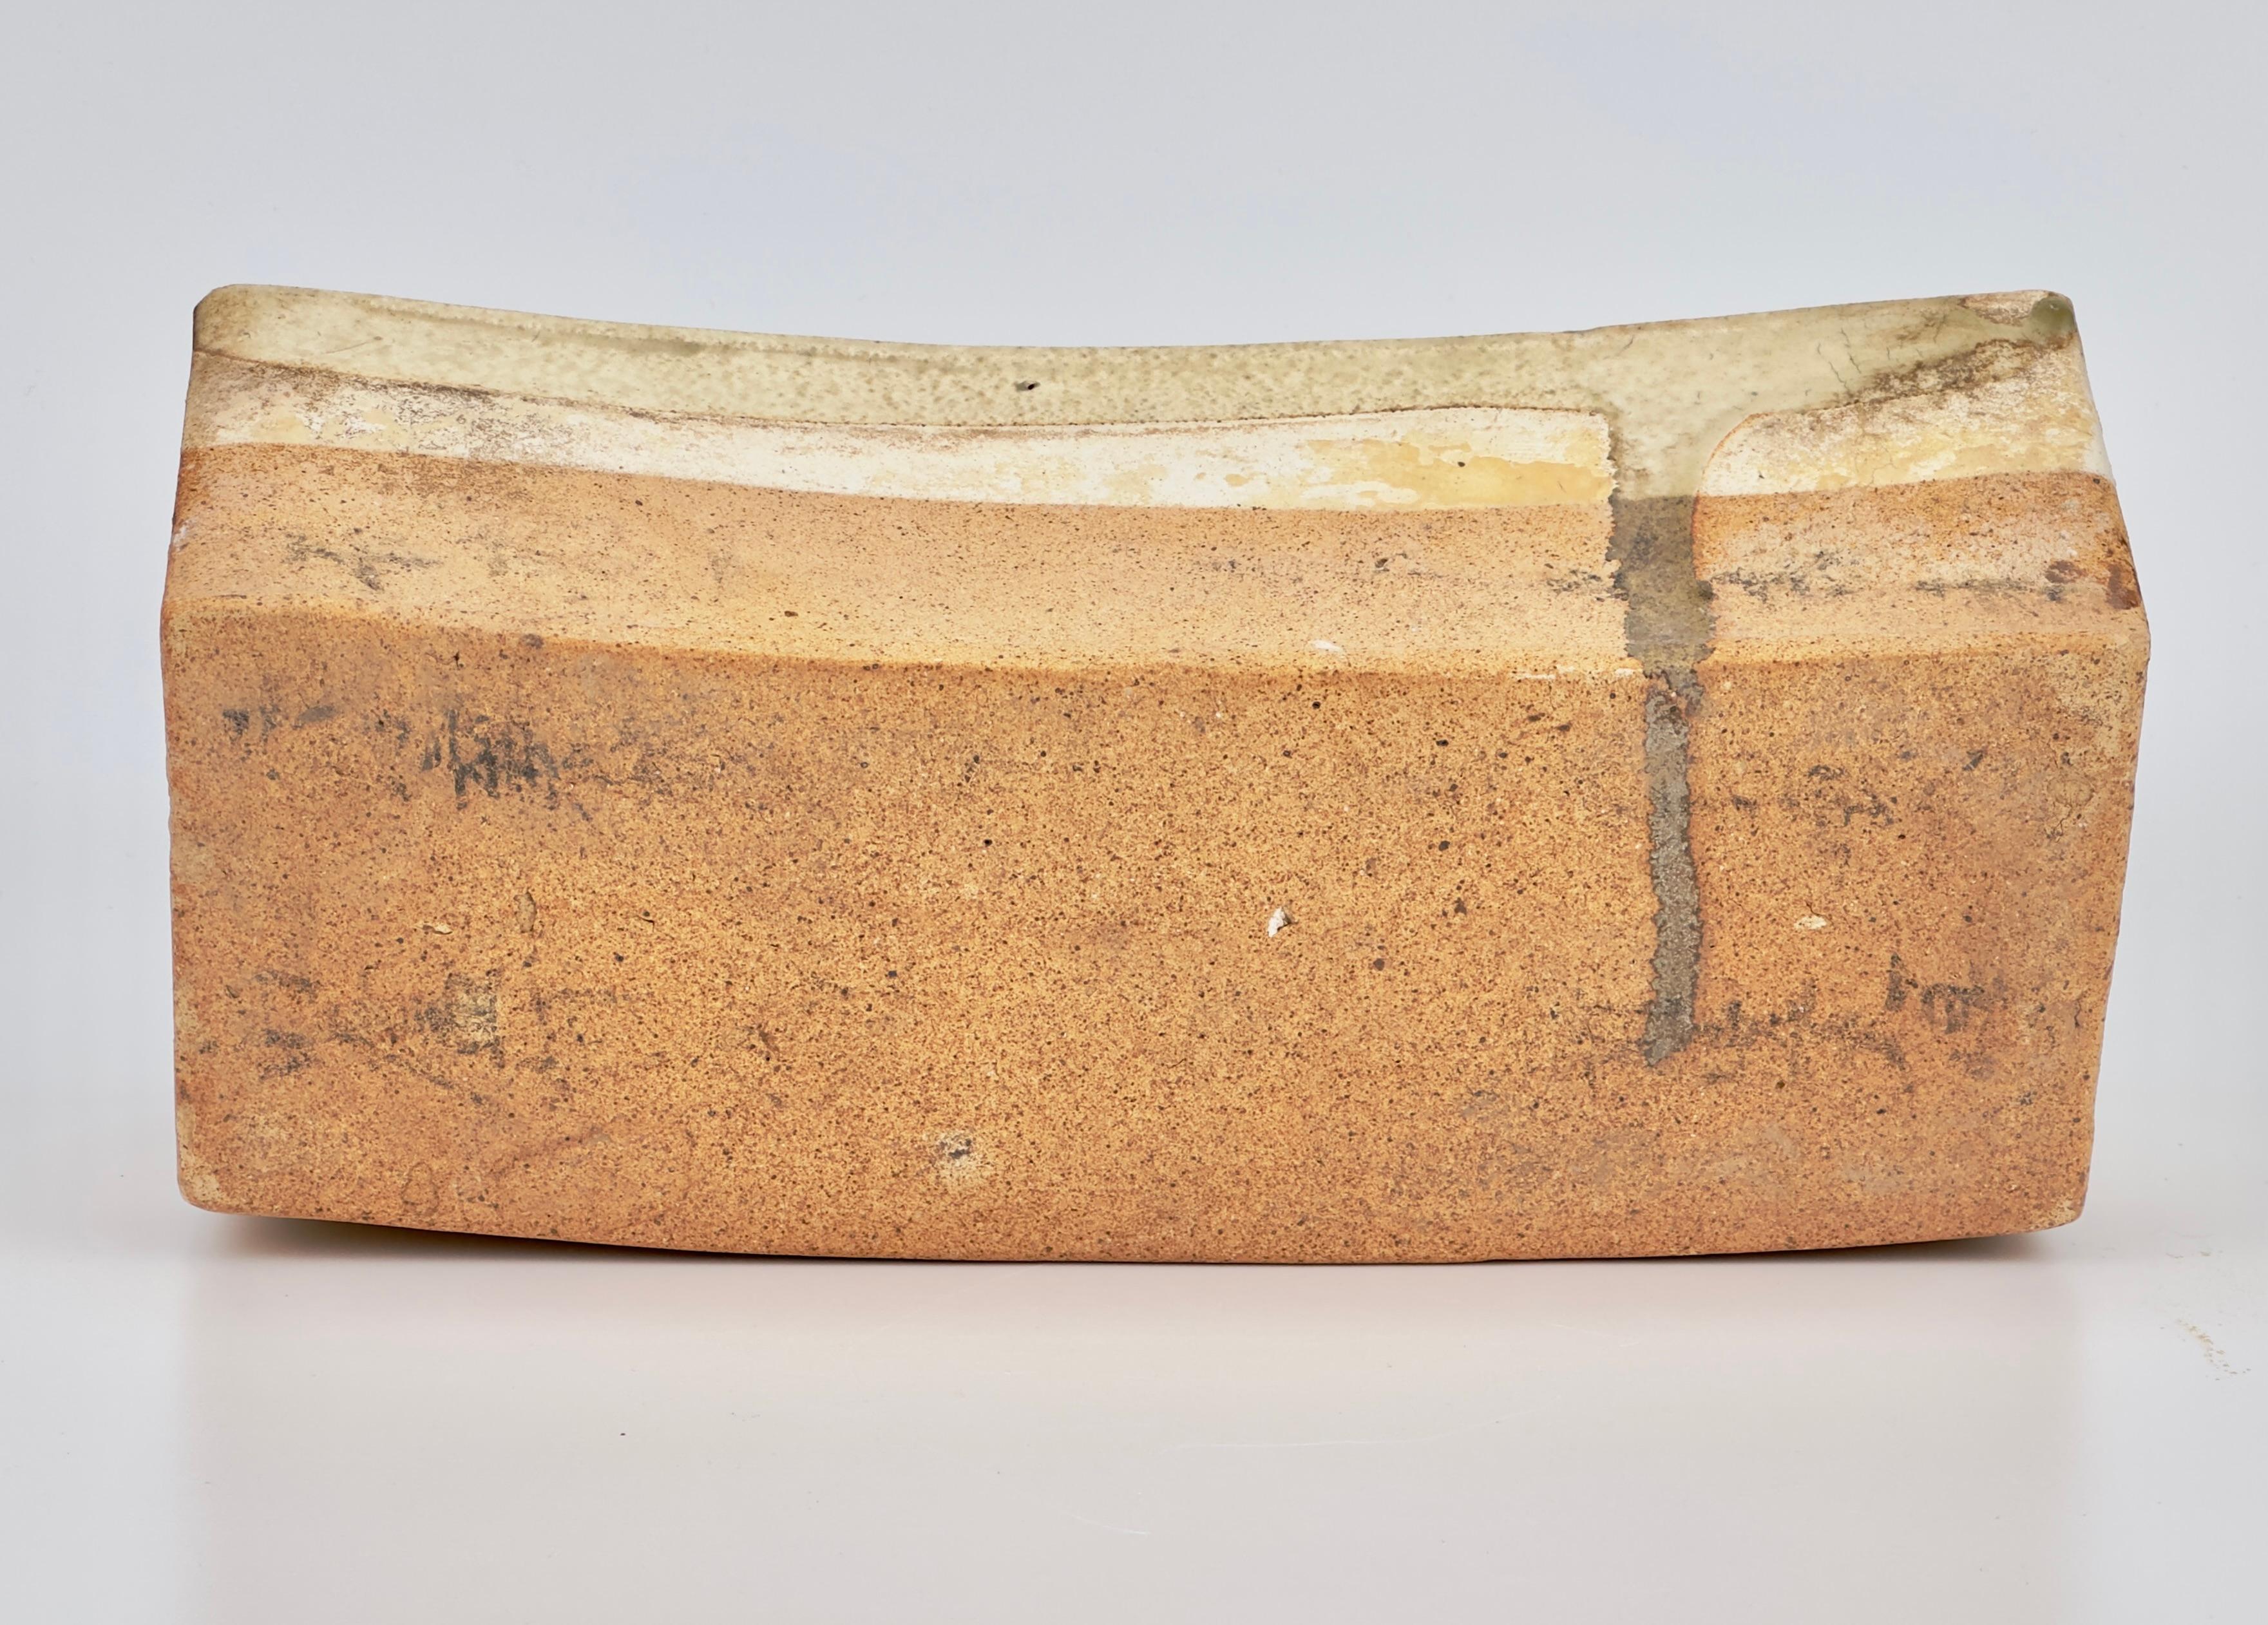 Cizhou Rectangular Pillow with Carved Decoration, Yuan Dynasty For Sale 1